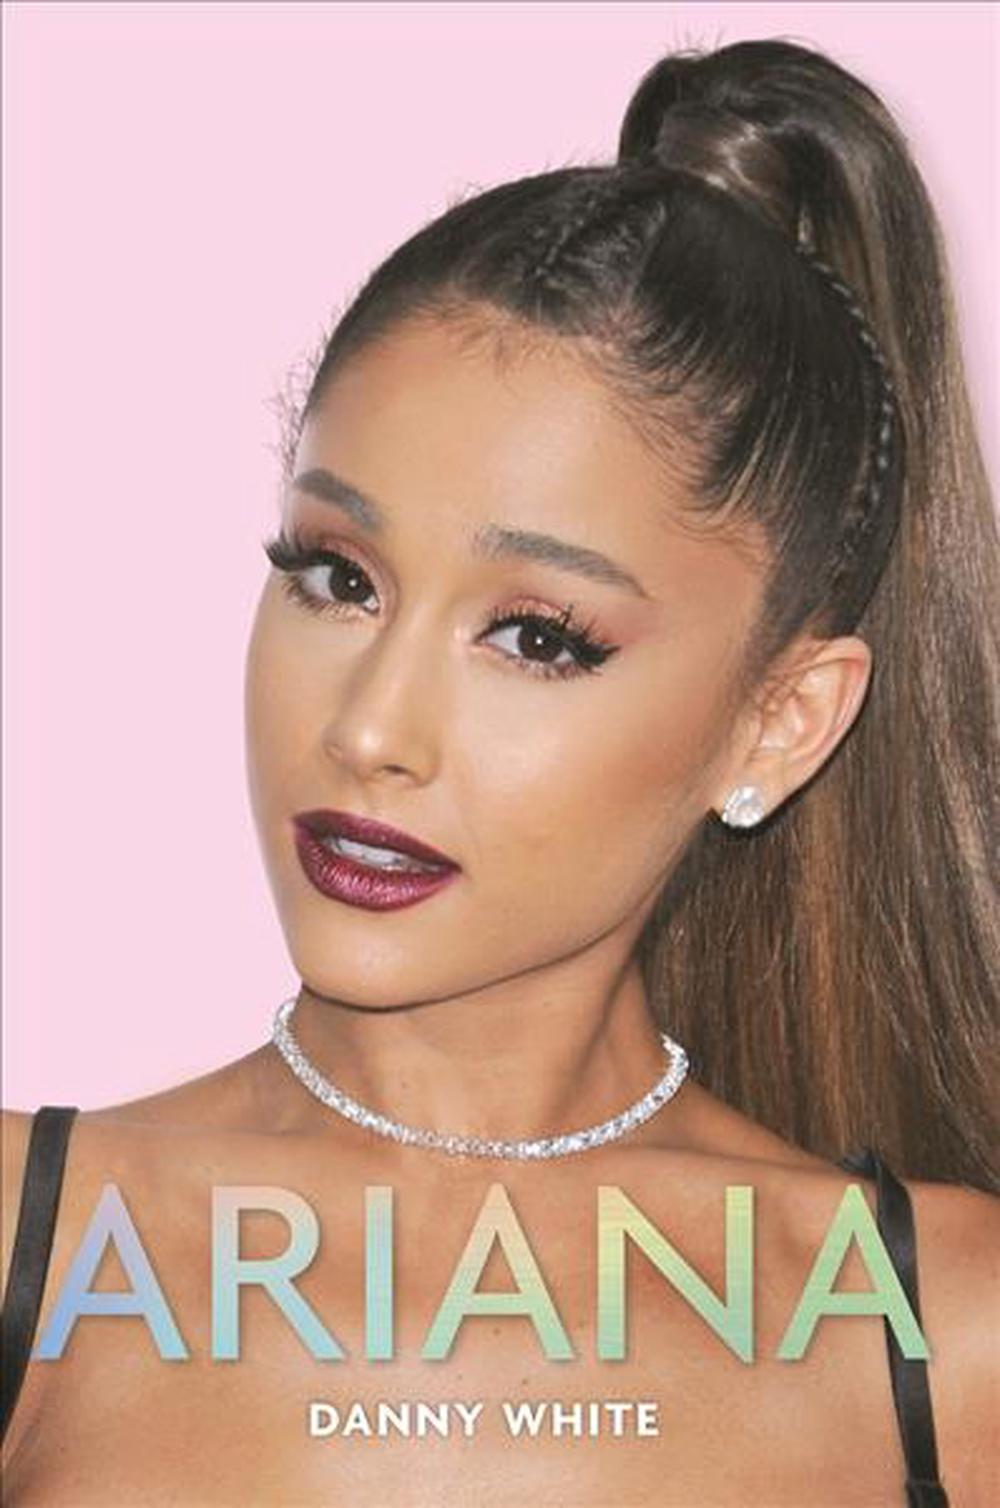 Ariana by Danny White Hardcover Book Free Shipping! | eBay